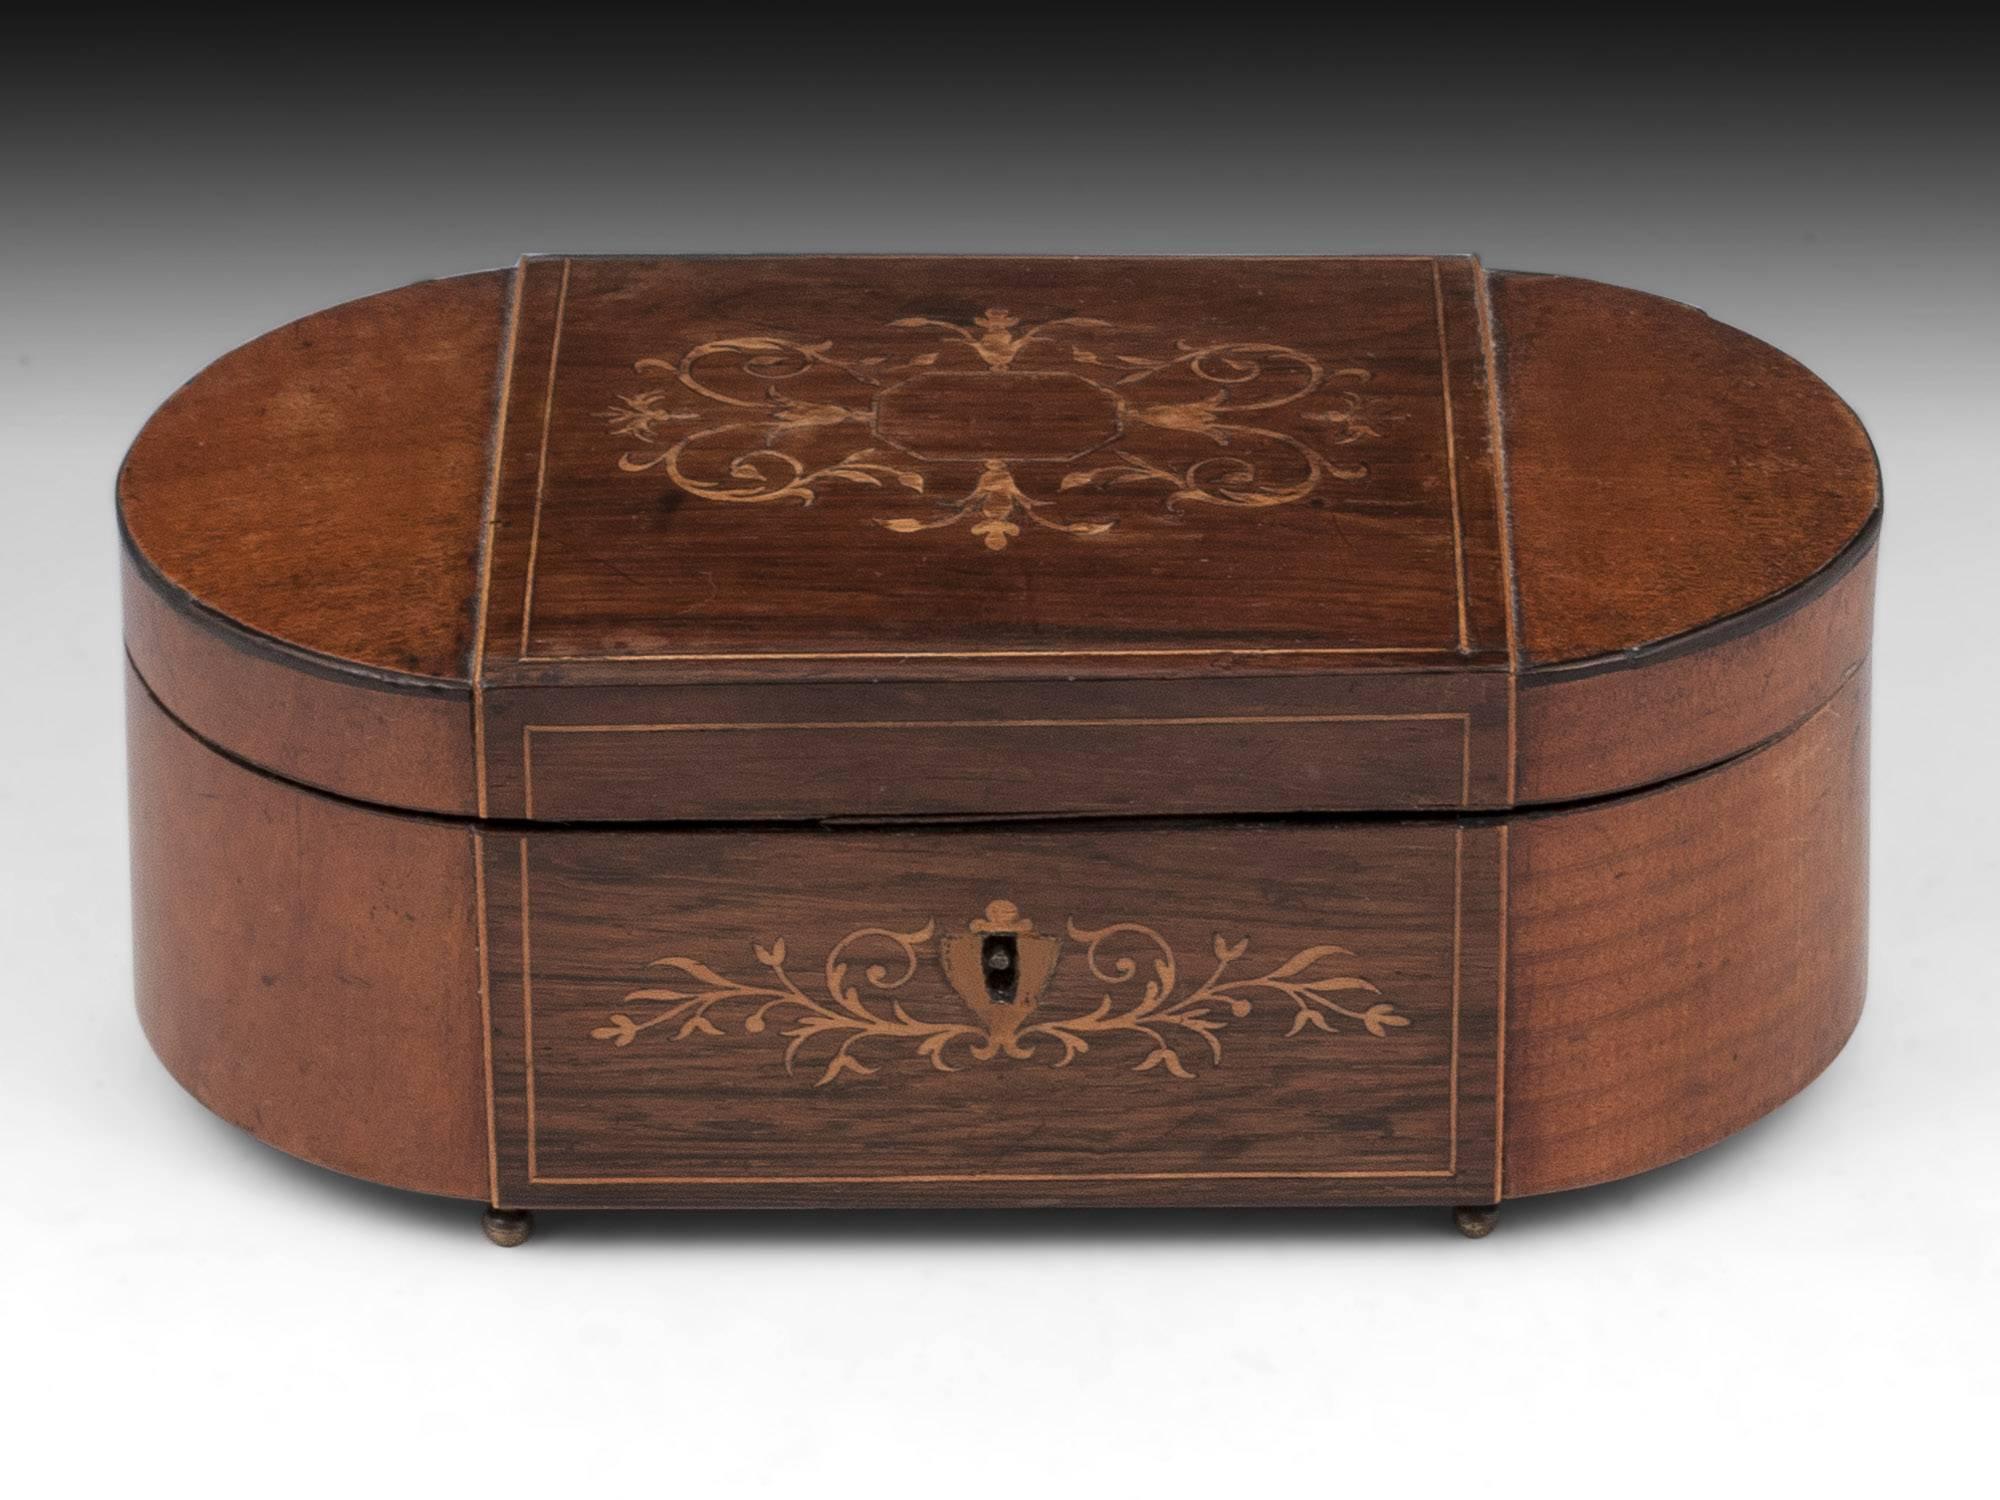 Antique Palais Royal sewing box veneered in mahogany and sycamore with boxwood stringing and floral inlays, standing on four small ball feet. 

Opening the palais royal box reveals its original mirror backed lid, framed with decorative rope. The